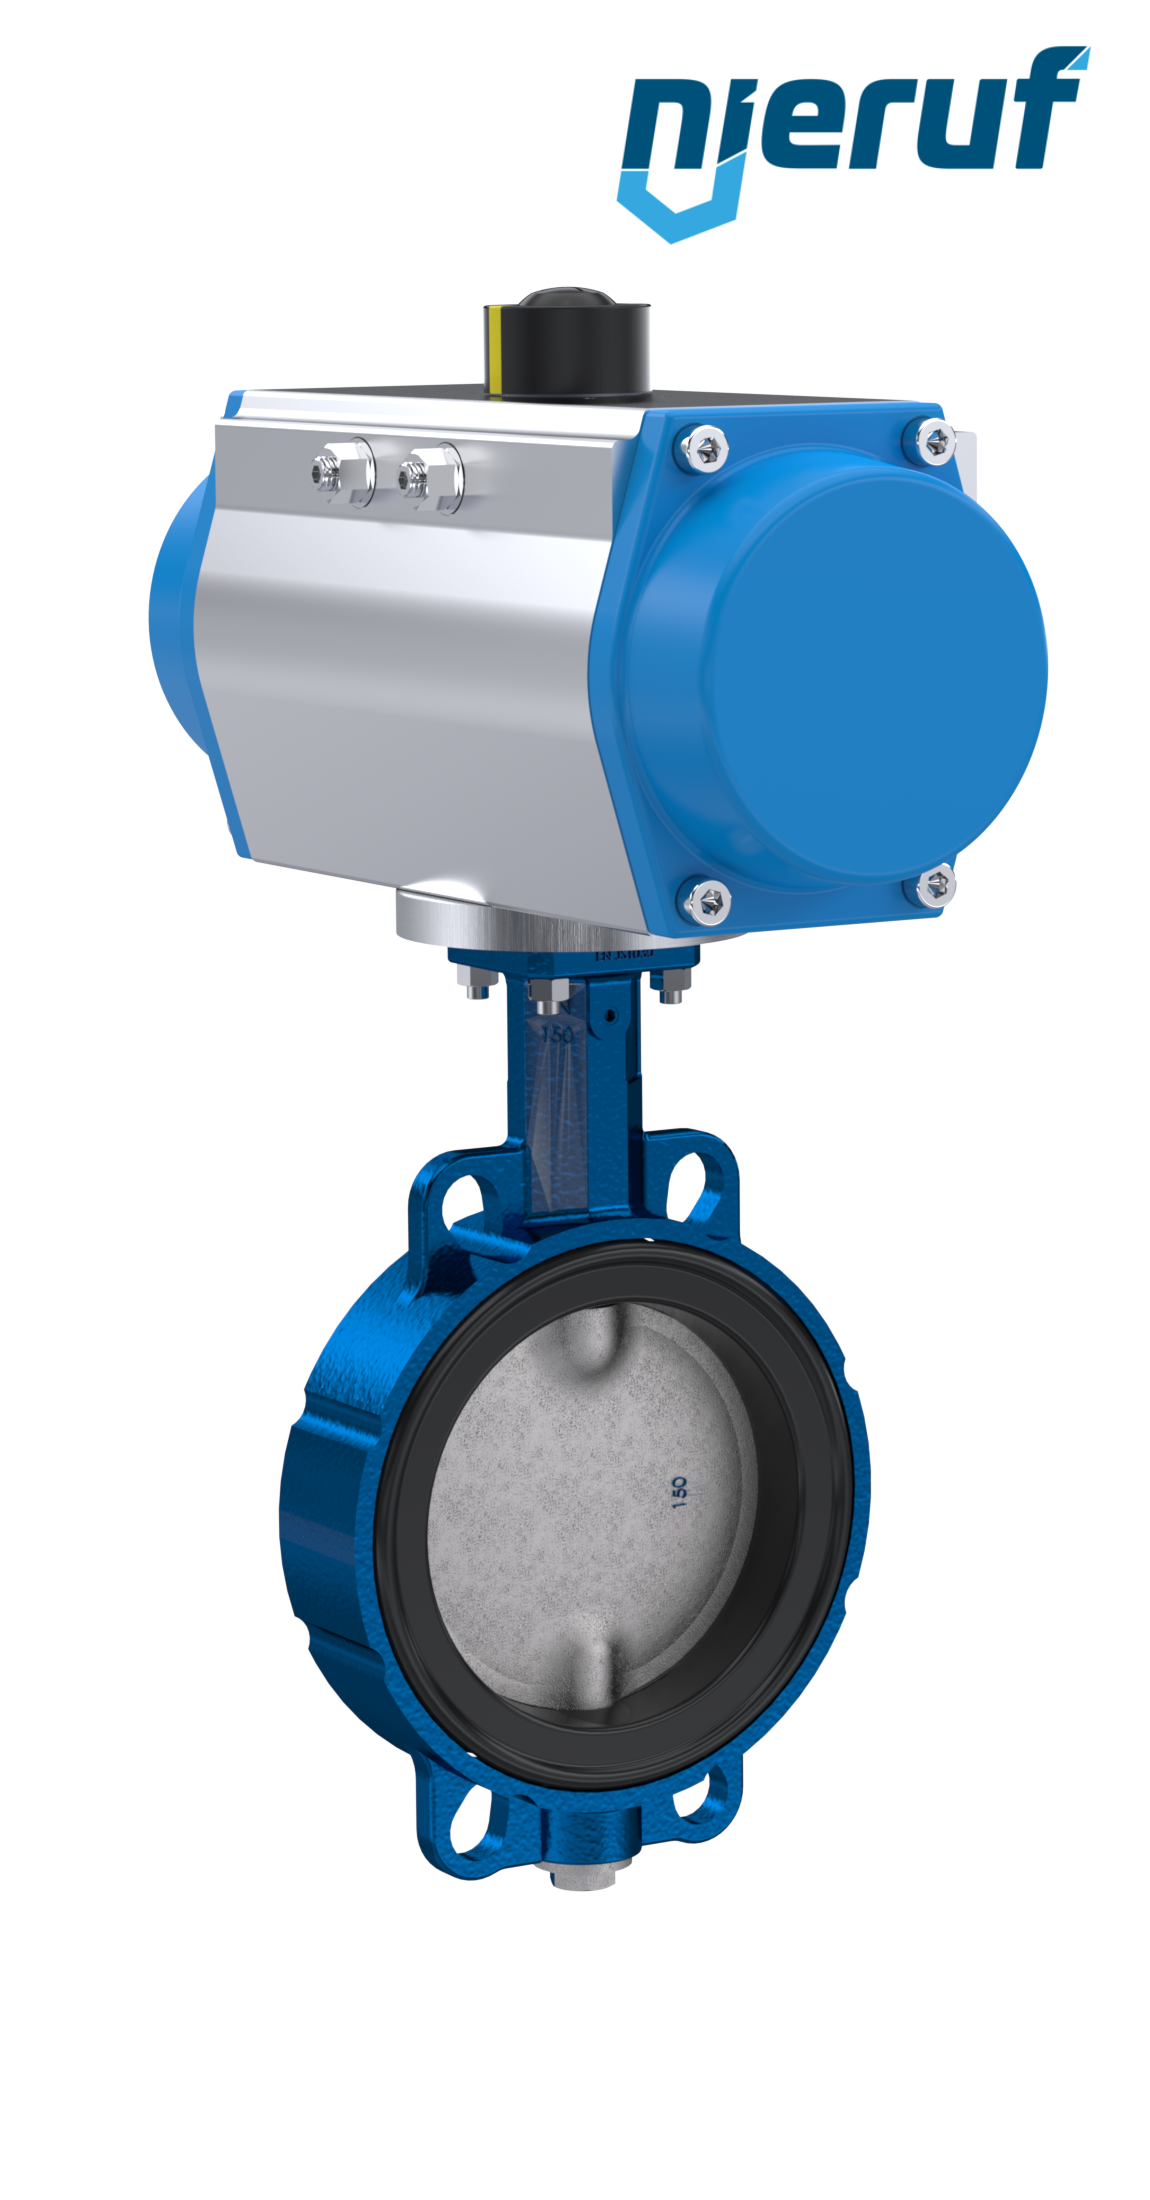 Butterfly valve DN 100 AK01 EPDM DVGW drinking water, WRAS, ACS, W270 pneumatic actuator single acting